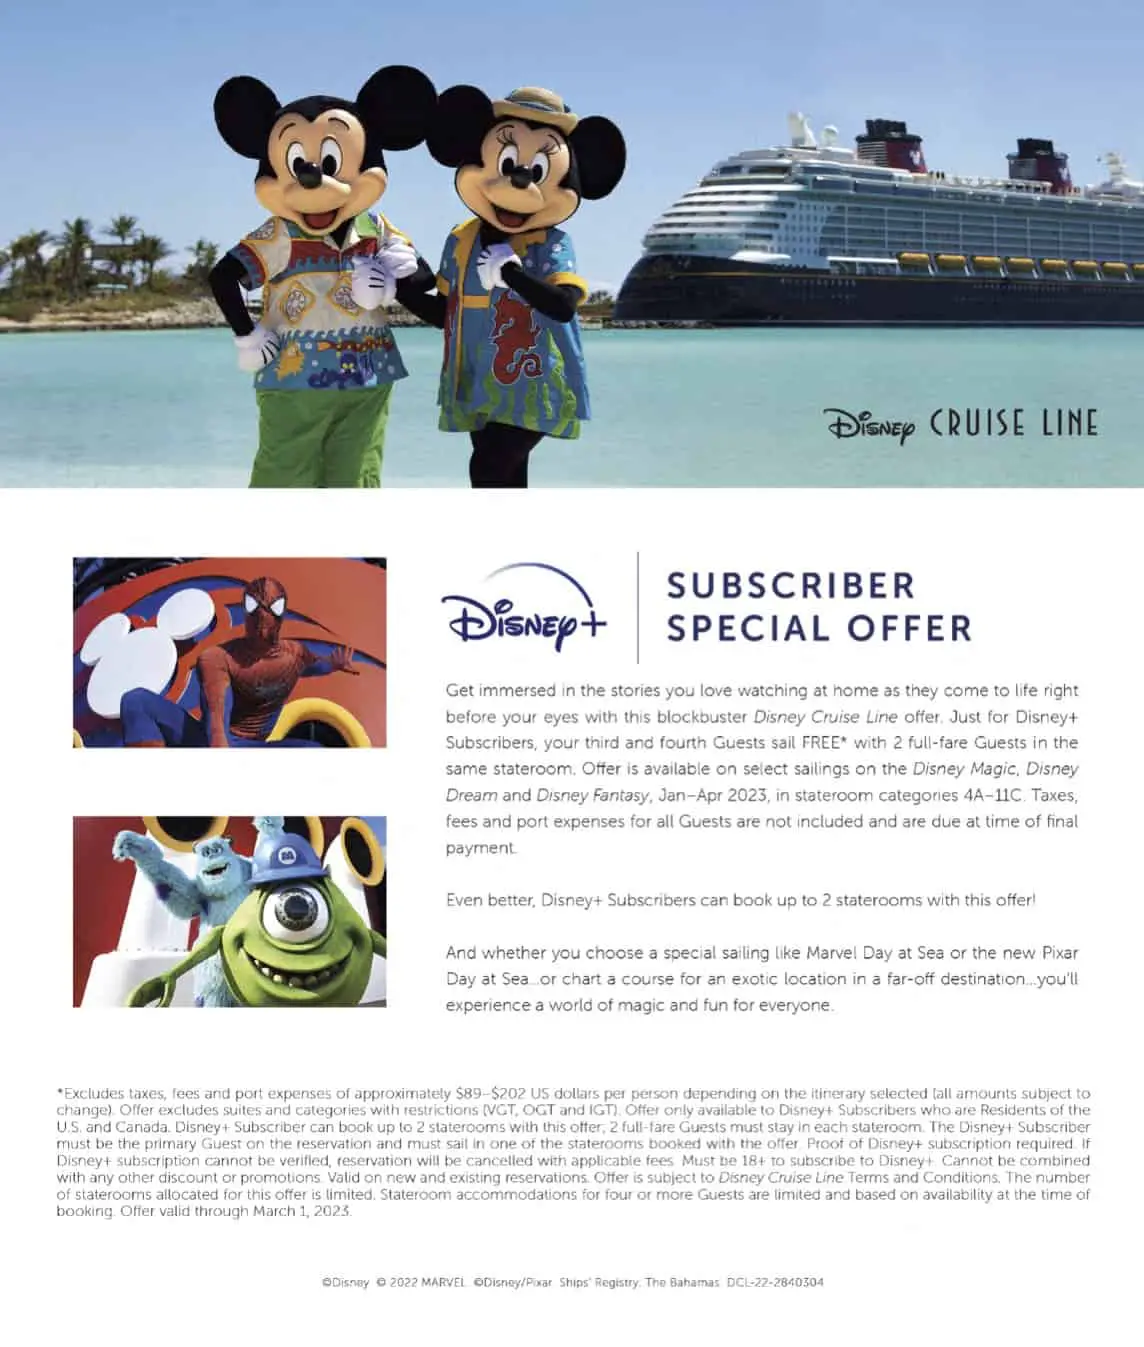 Disney+ Subscribers Get a Special Offer on Select Disney Cruises The